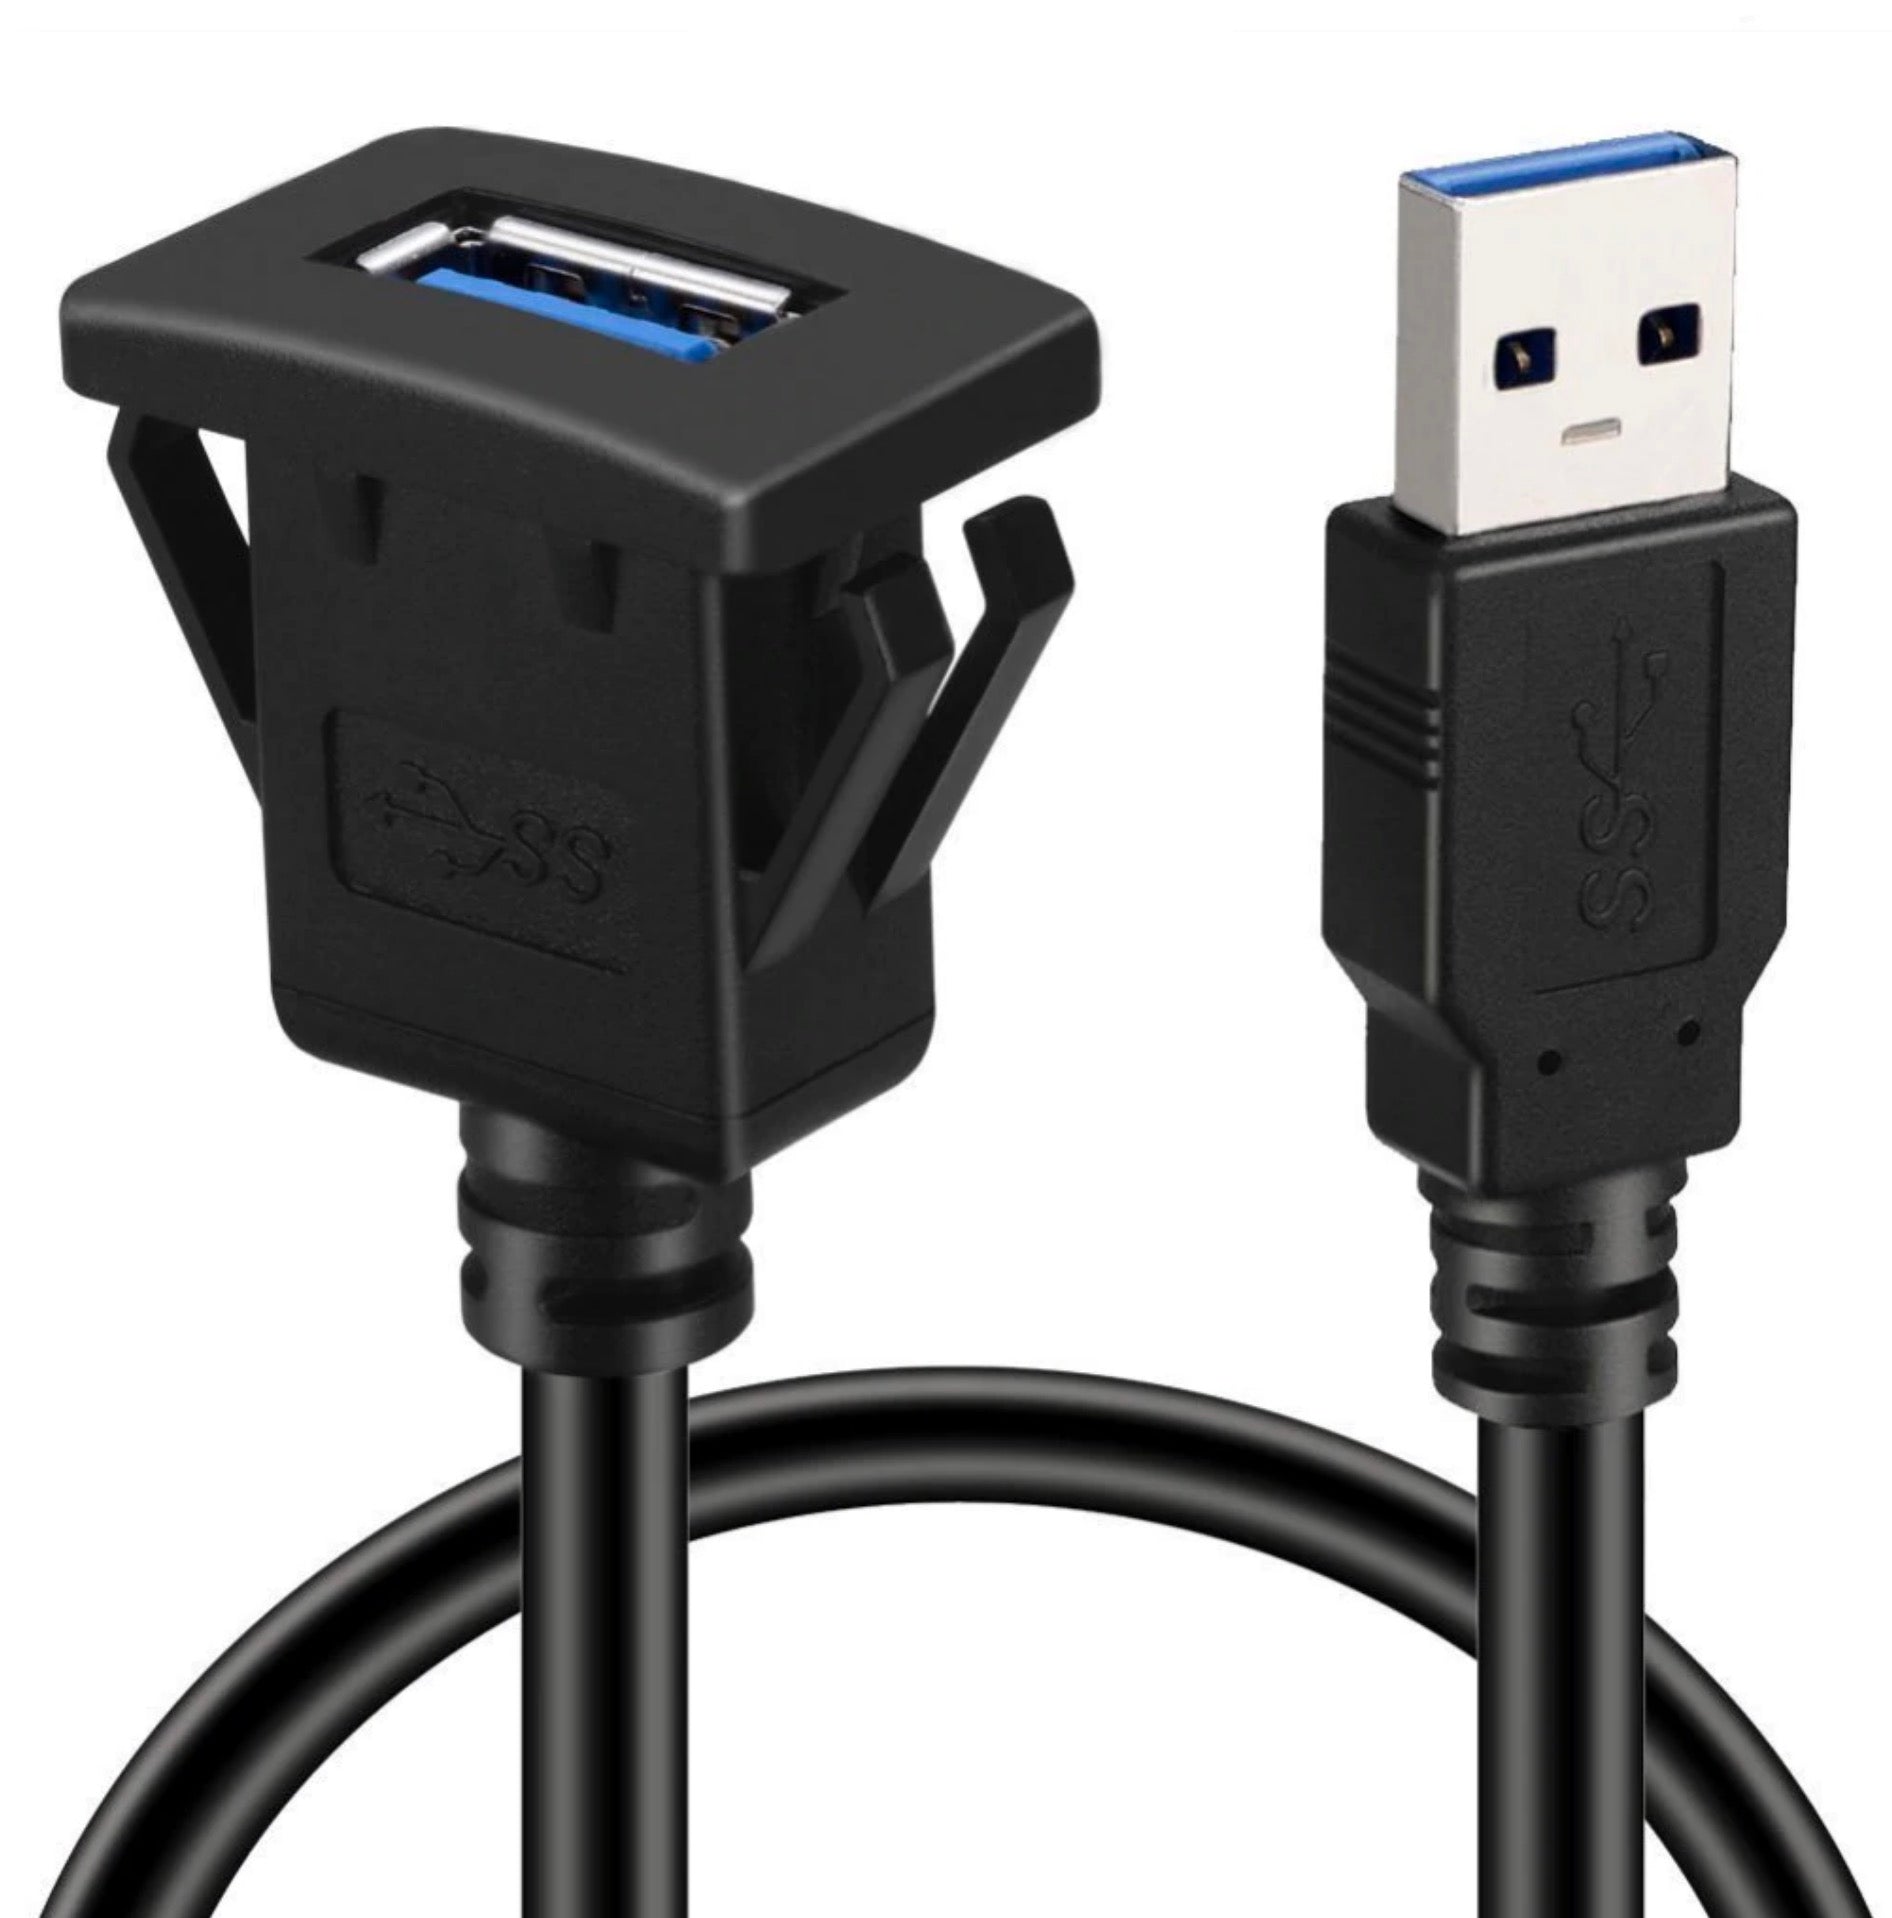 USB 3.0 Type A Male to Female Dash Mount Cable